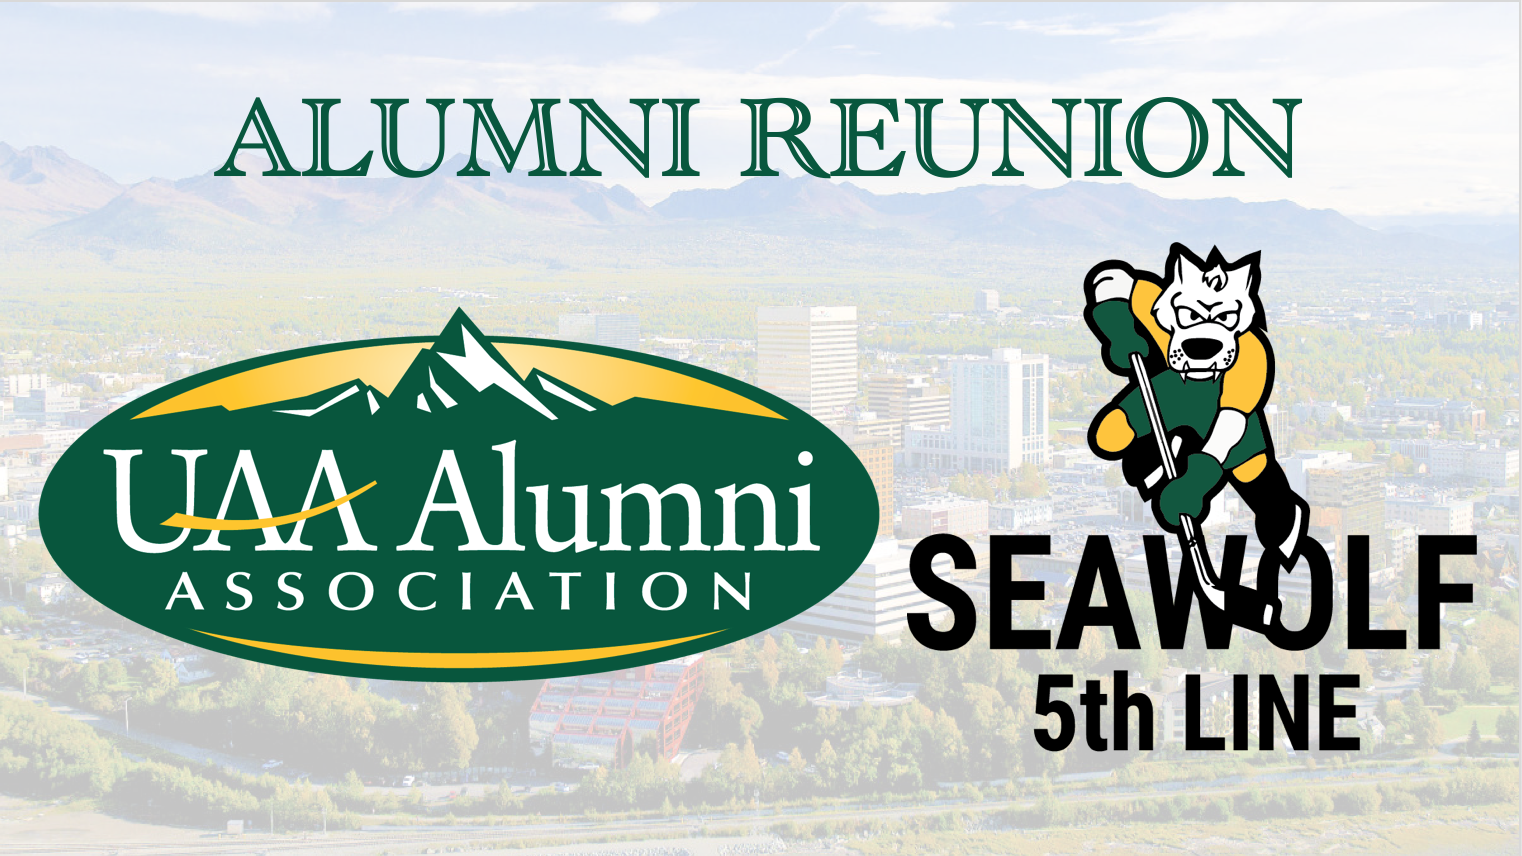 UAA Alumni Association and Seawolf 5th Line logos in front of an aerial view of Anchorage